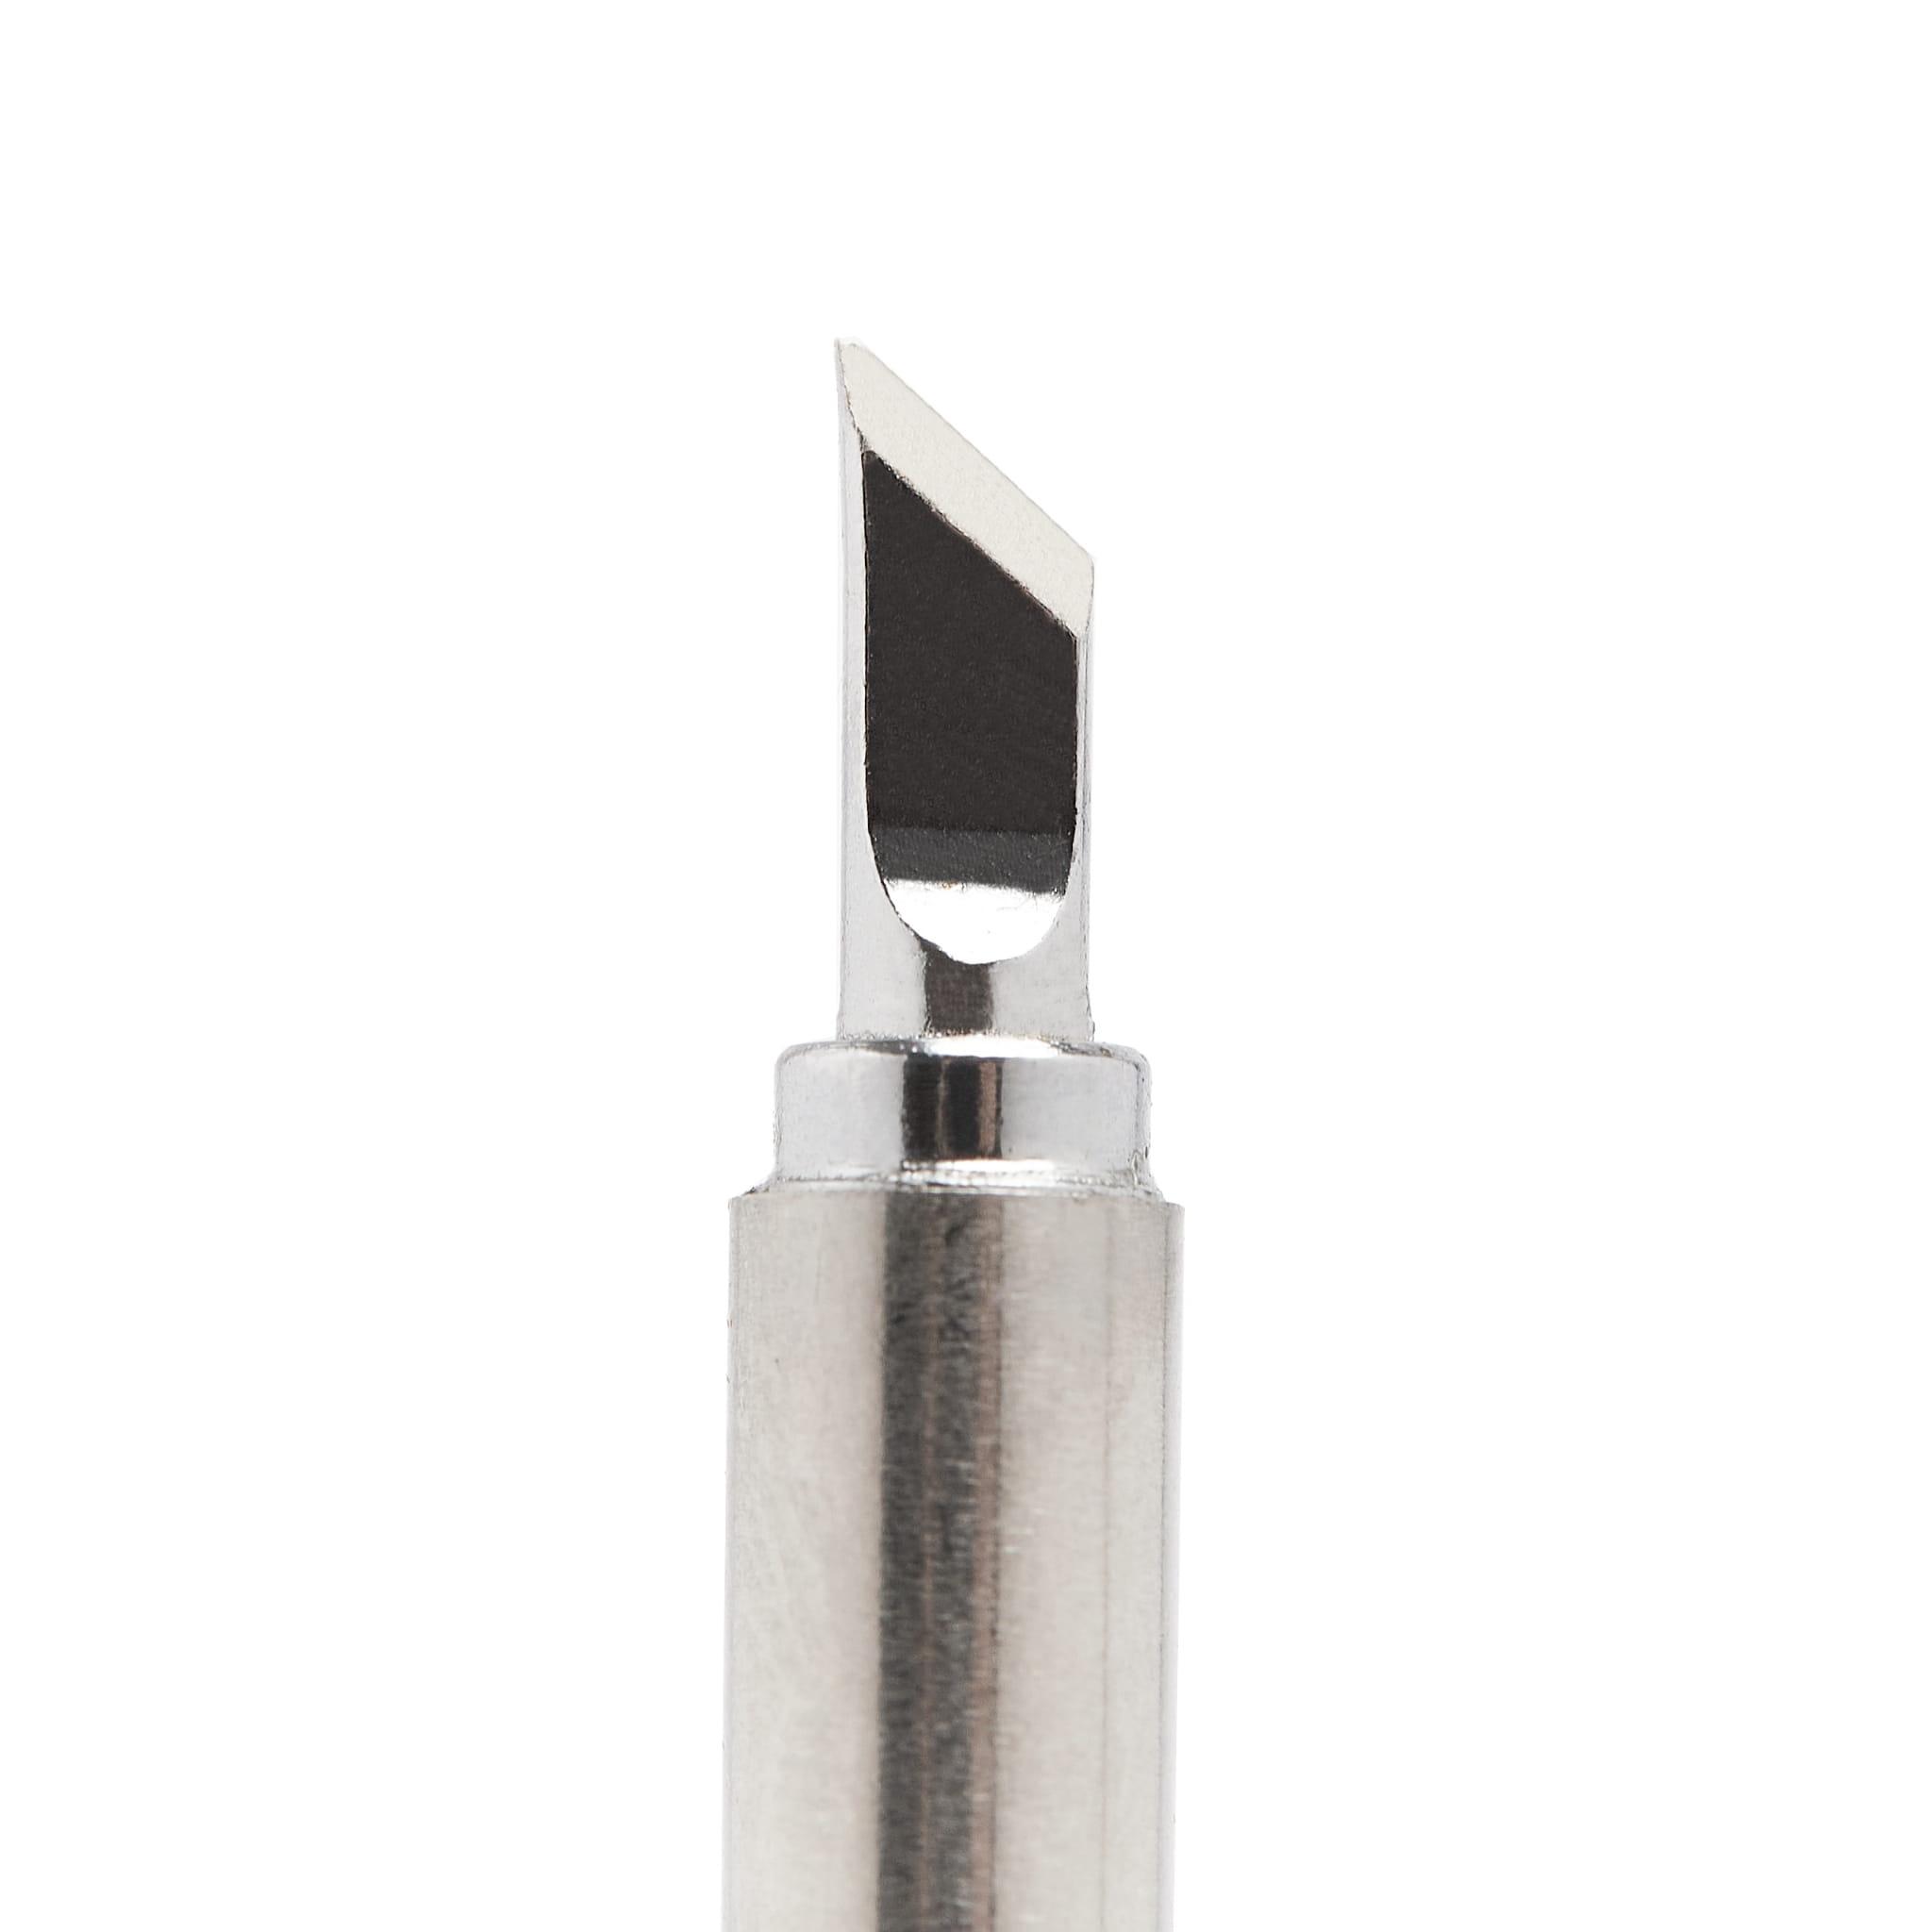 Soldering tip T12-KU type 3.2mm blade with built-in heater for T12 soldering station